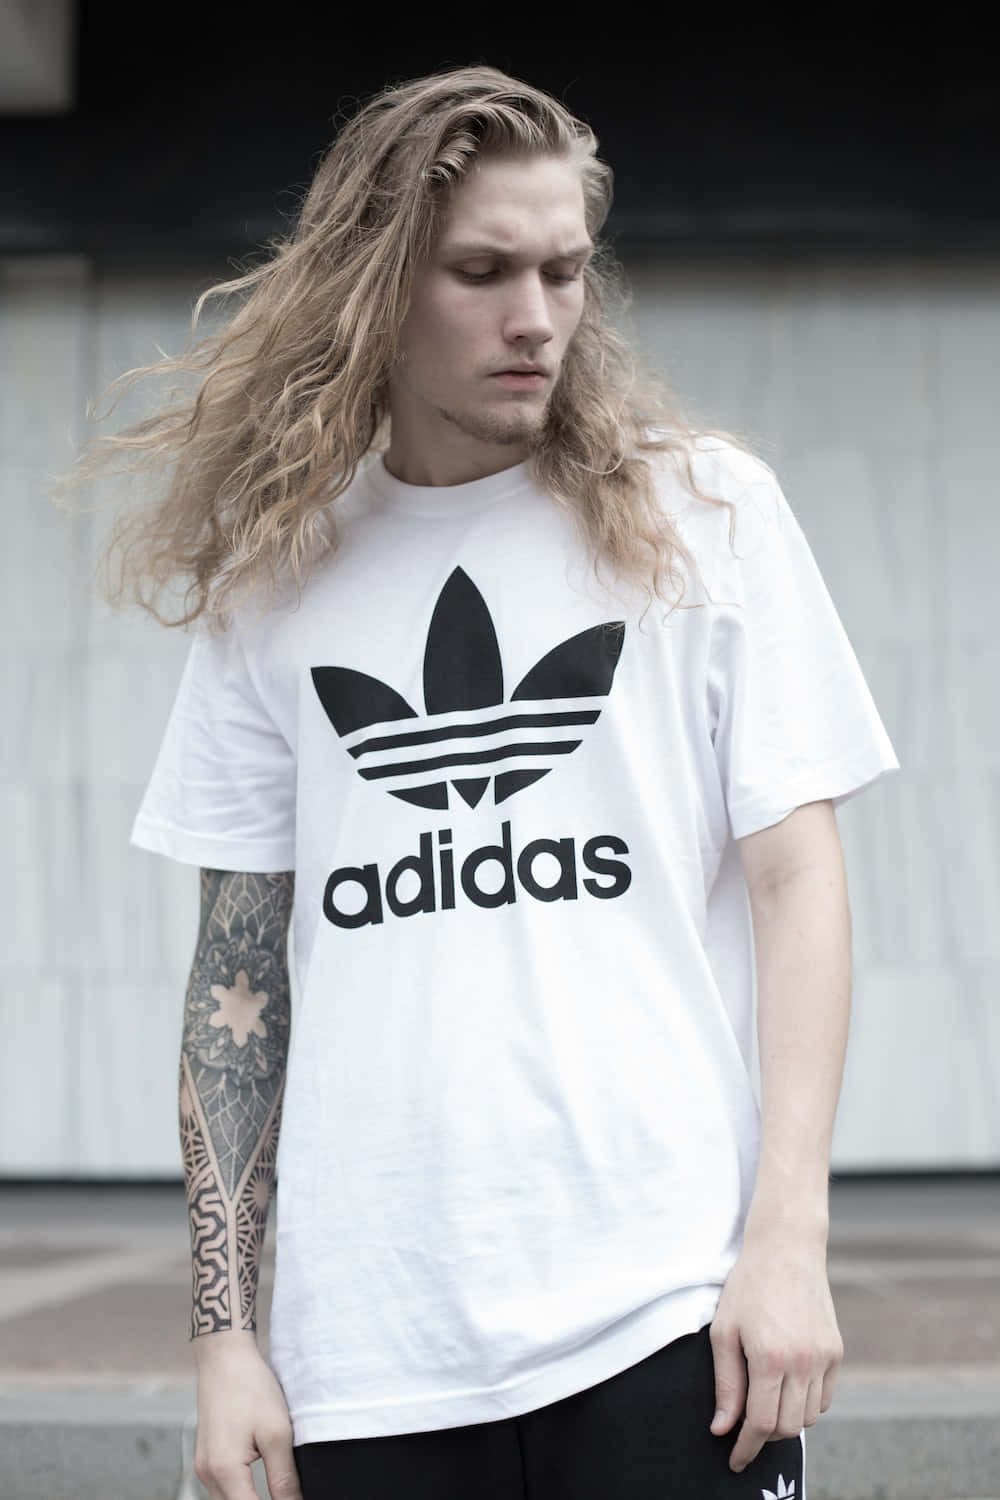 Get the iconic Adidas look with a modern twist.